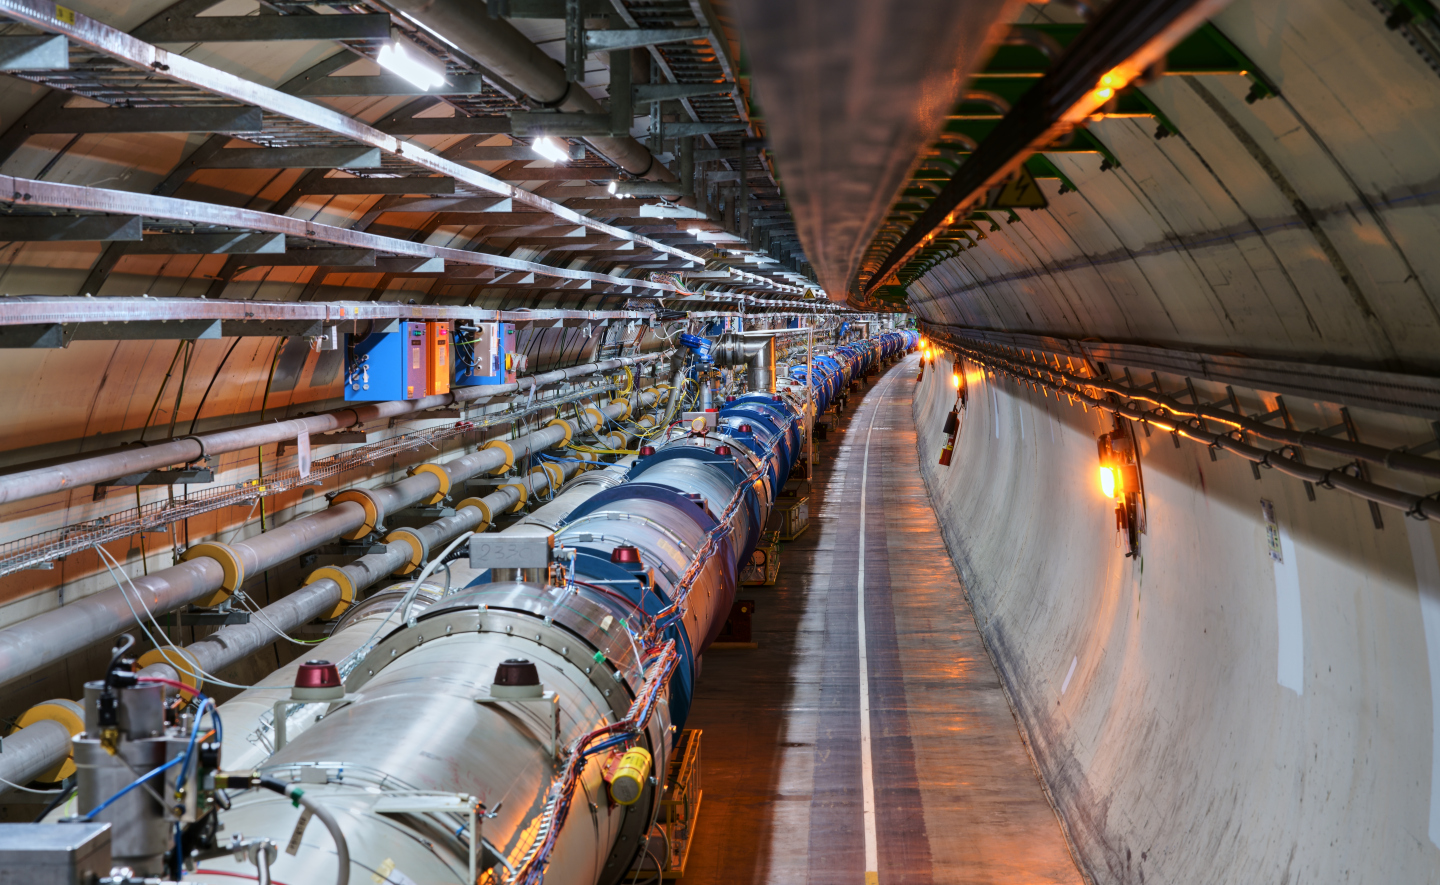 View of the LHC